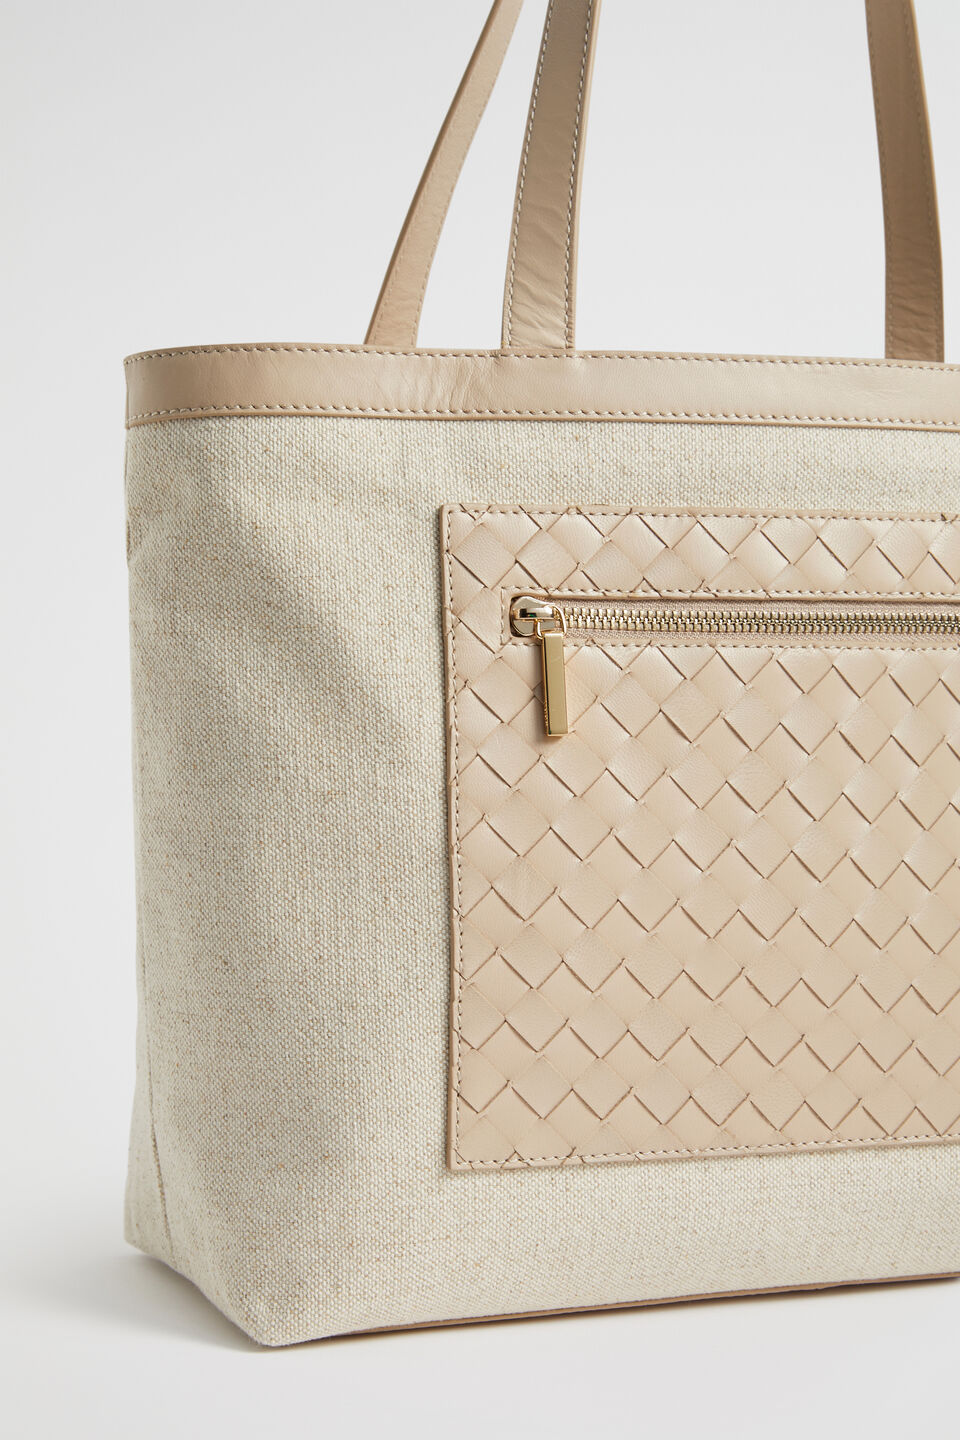 Leather Woven Fabric Tote  Champagne Beige